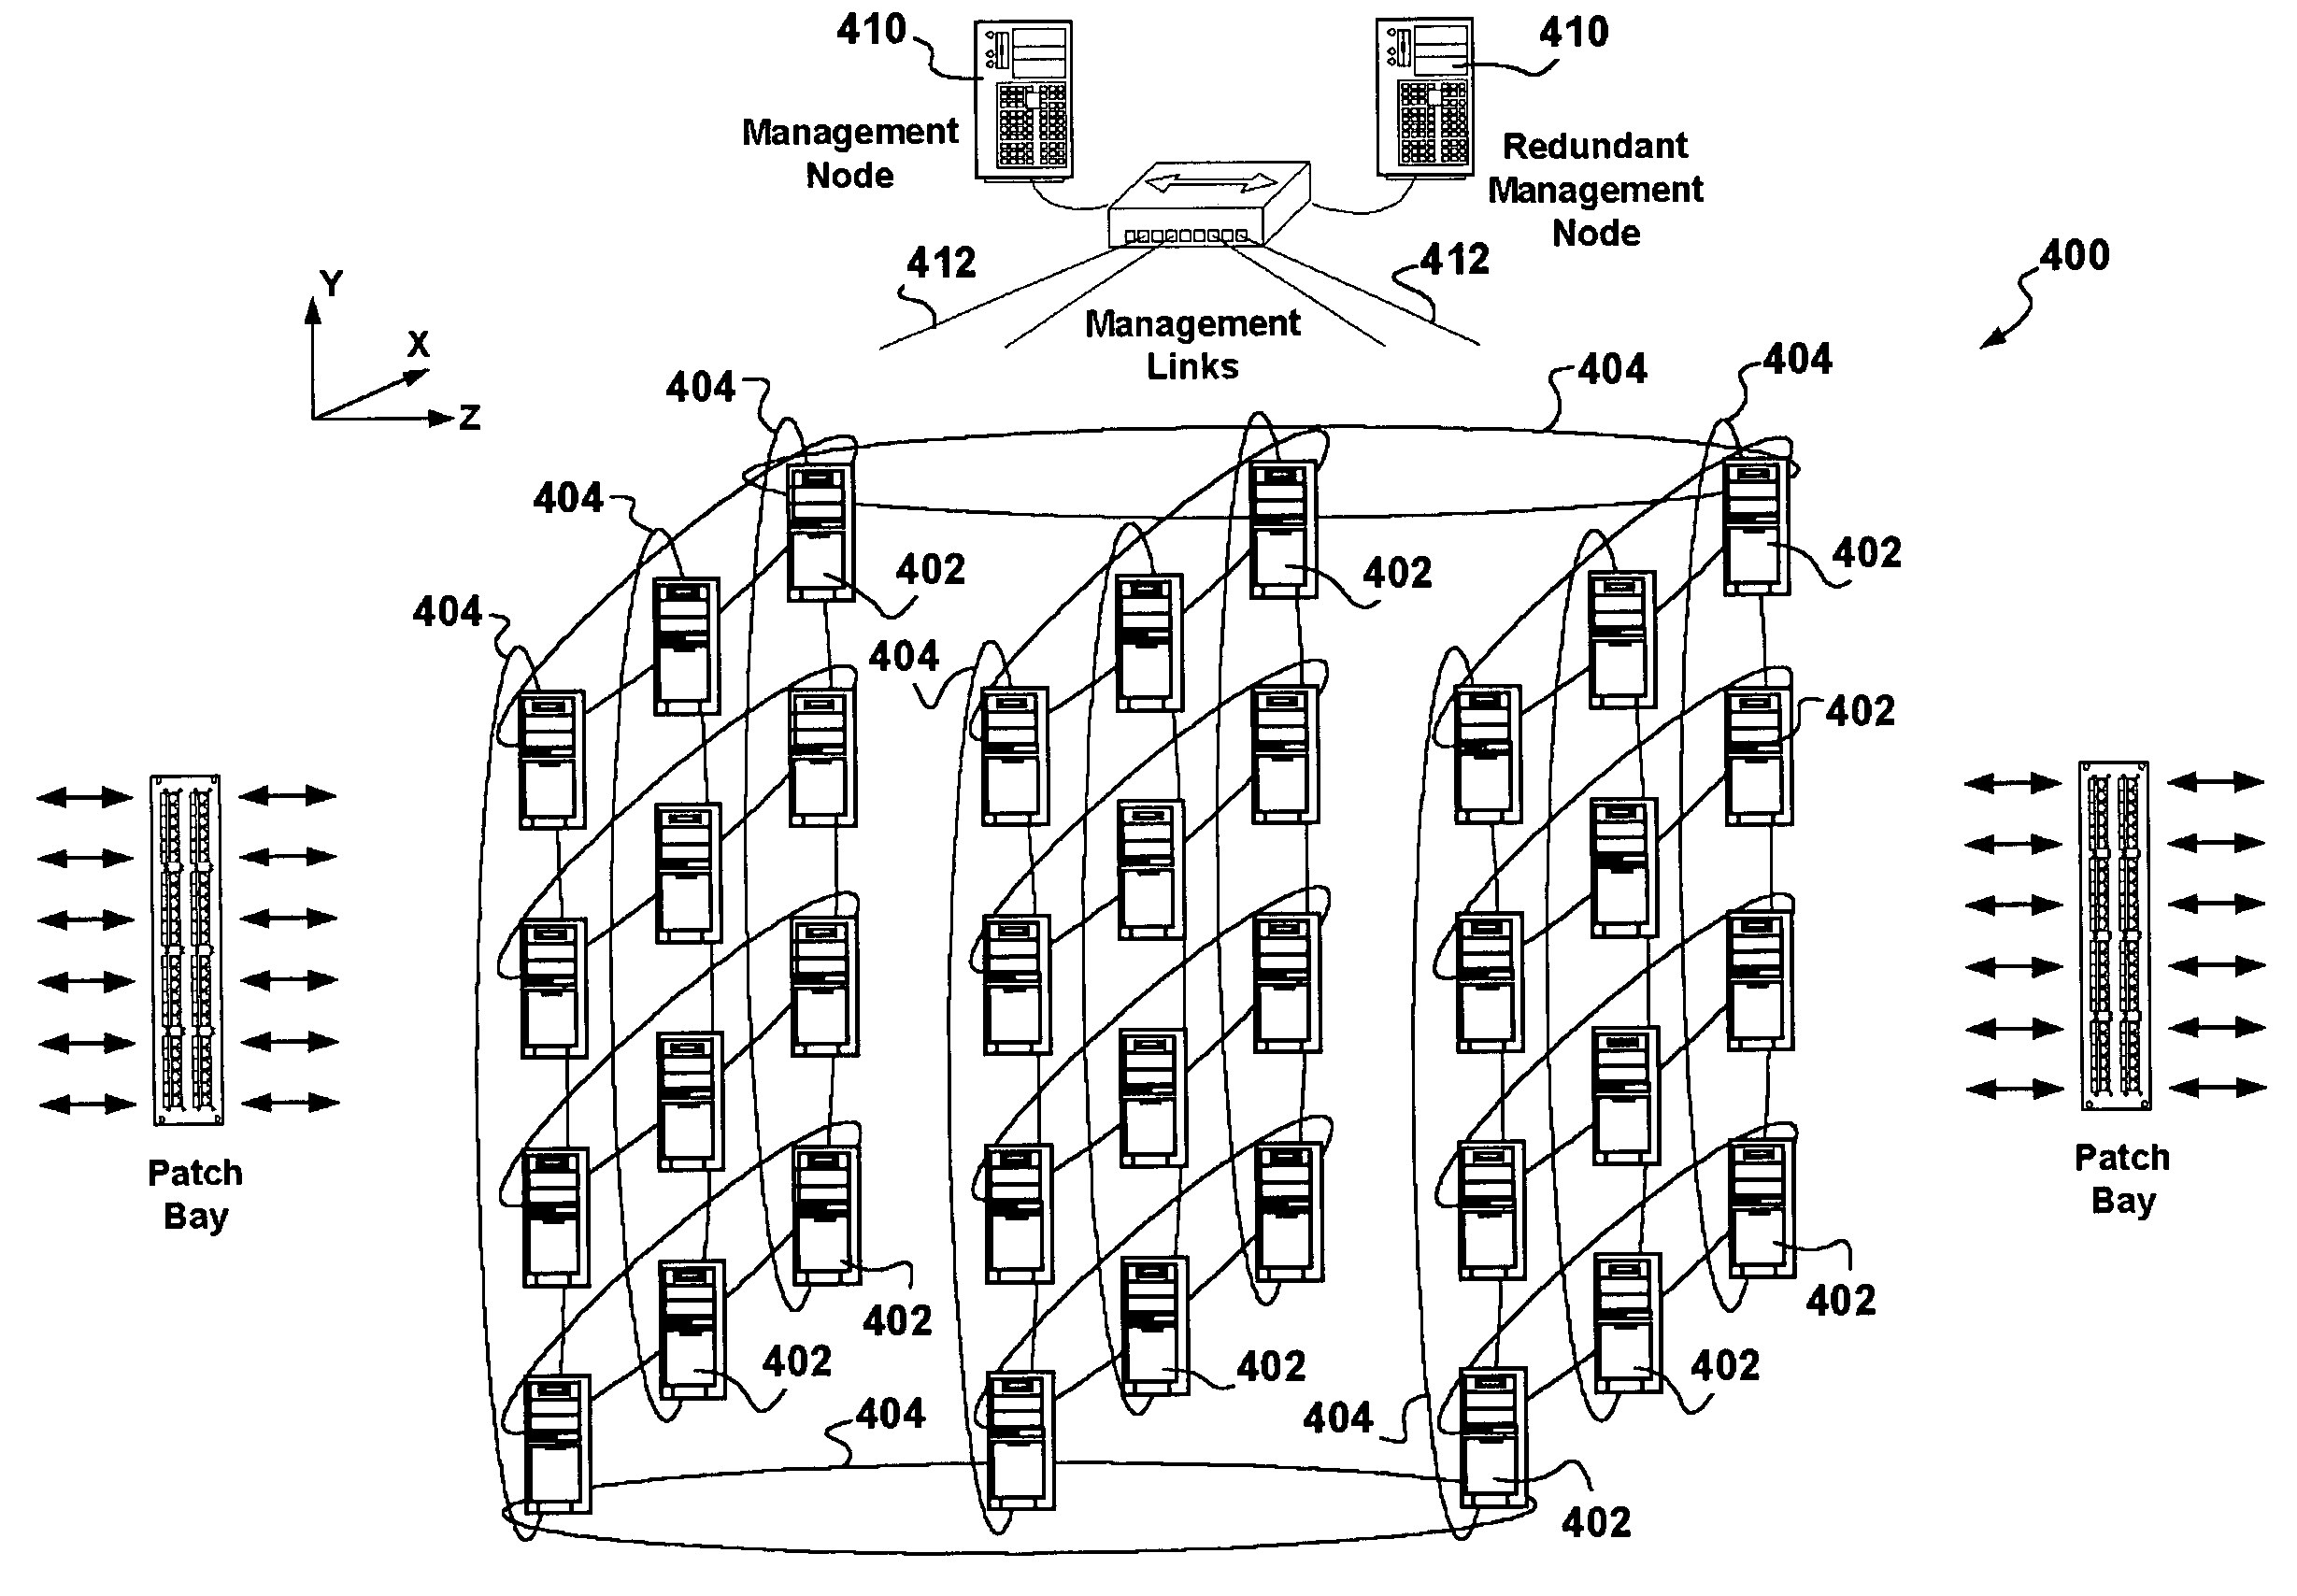 Software configurable cluster-based router using stock personal computers as cluster nodes